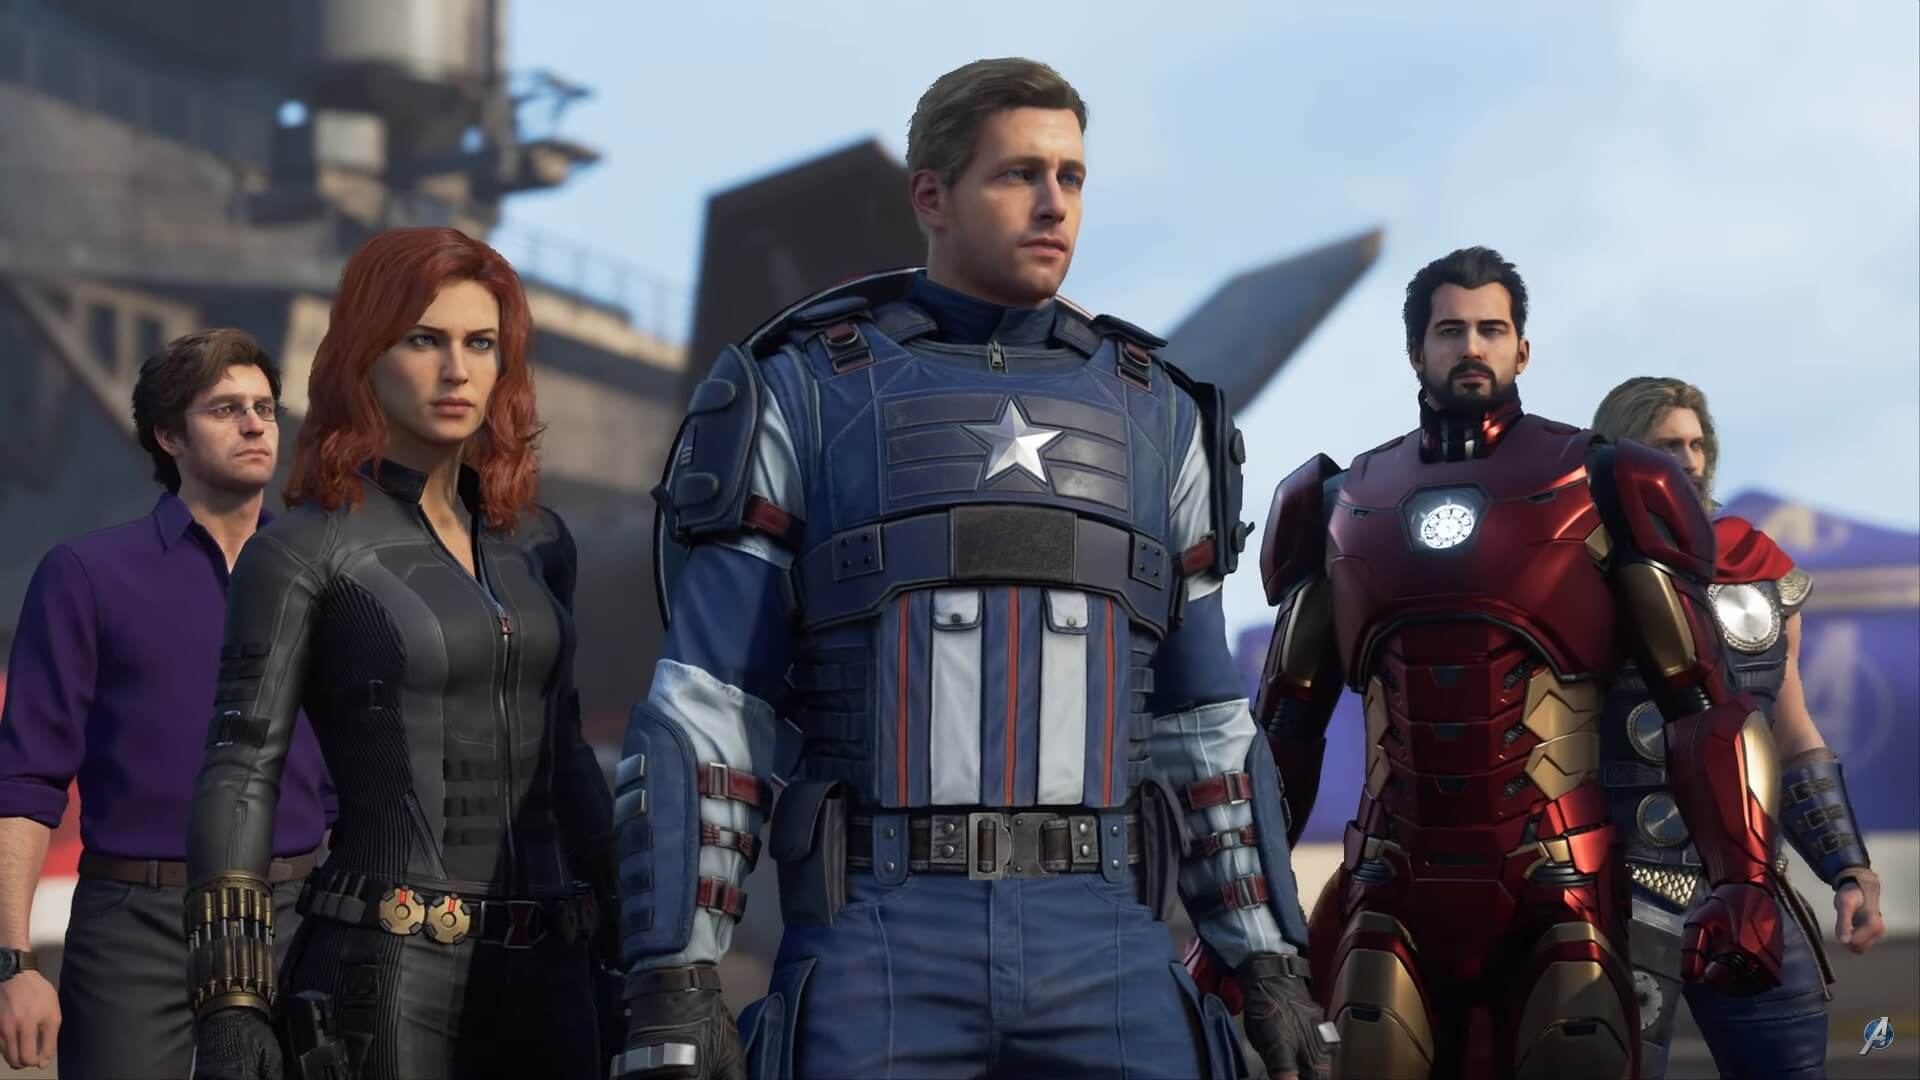 Avengers game delayed until September to add extra polish